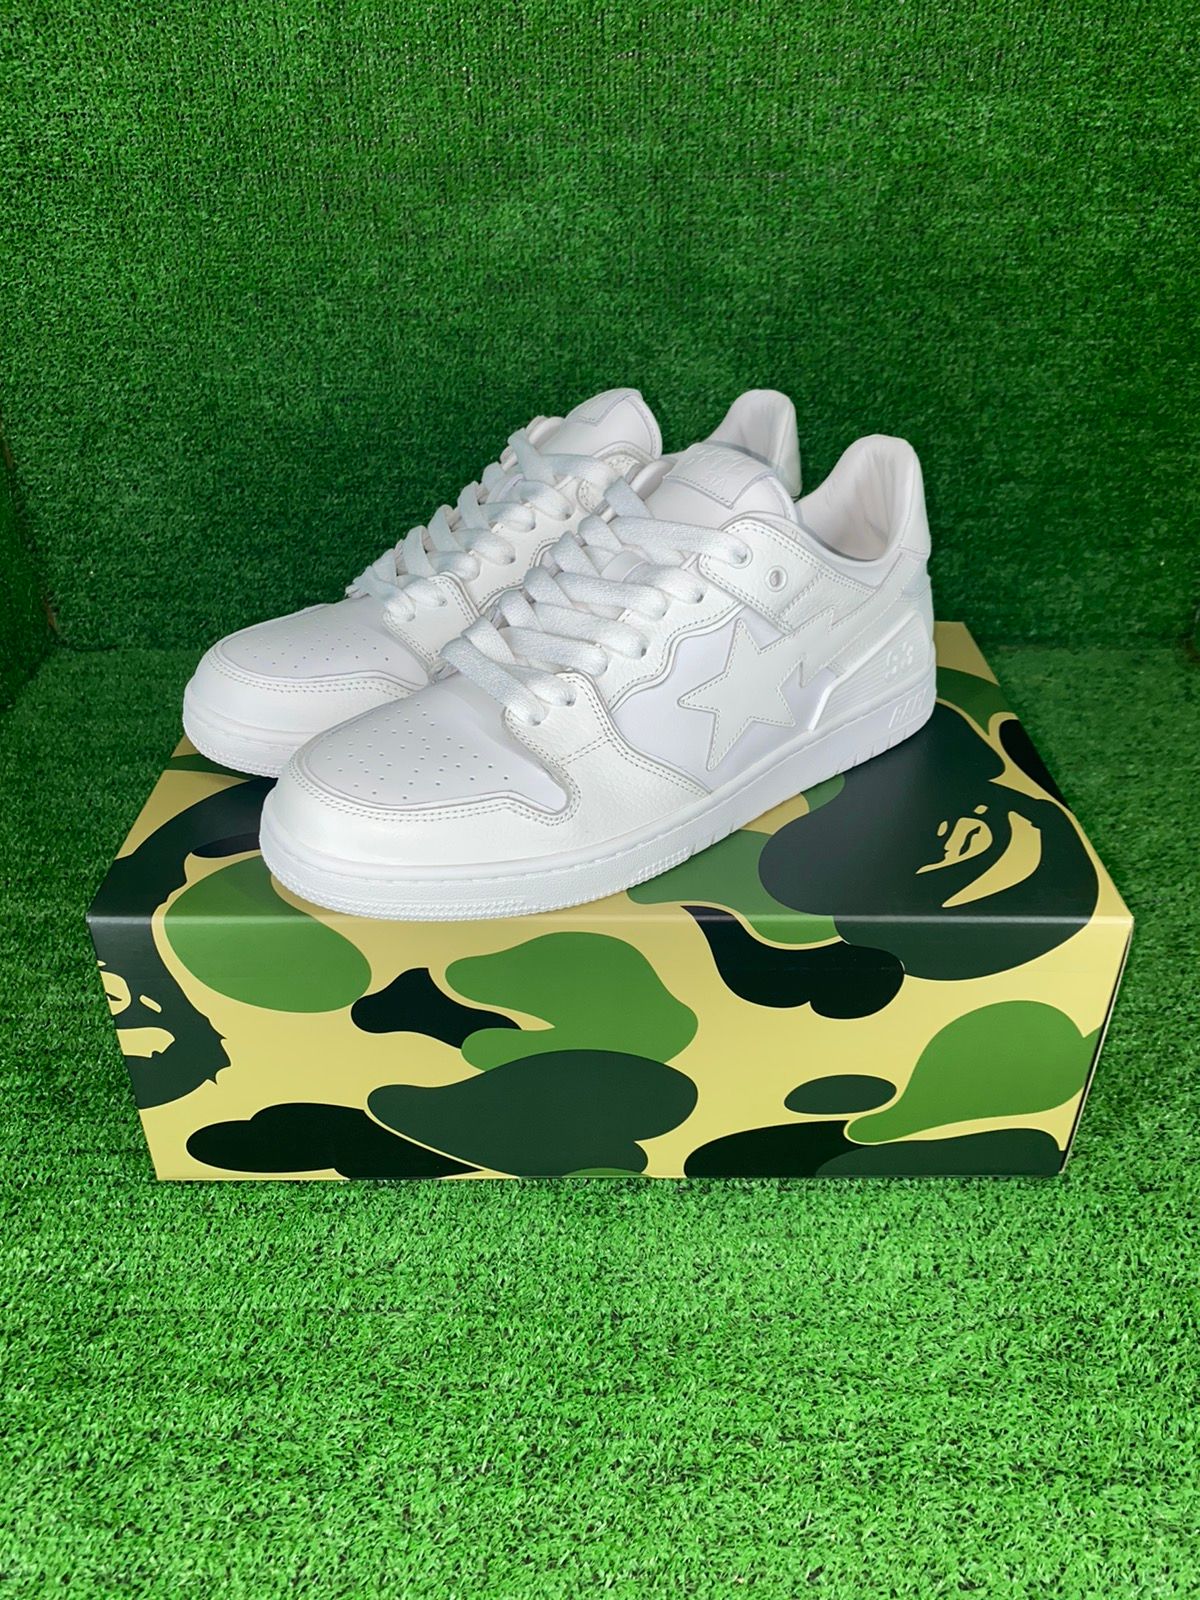 Pre-owned Bape Sk8 Sta 3 White Size 7 Shoes